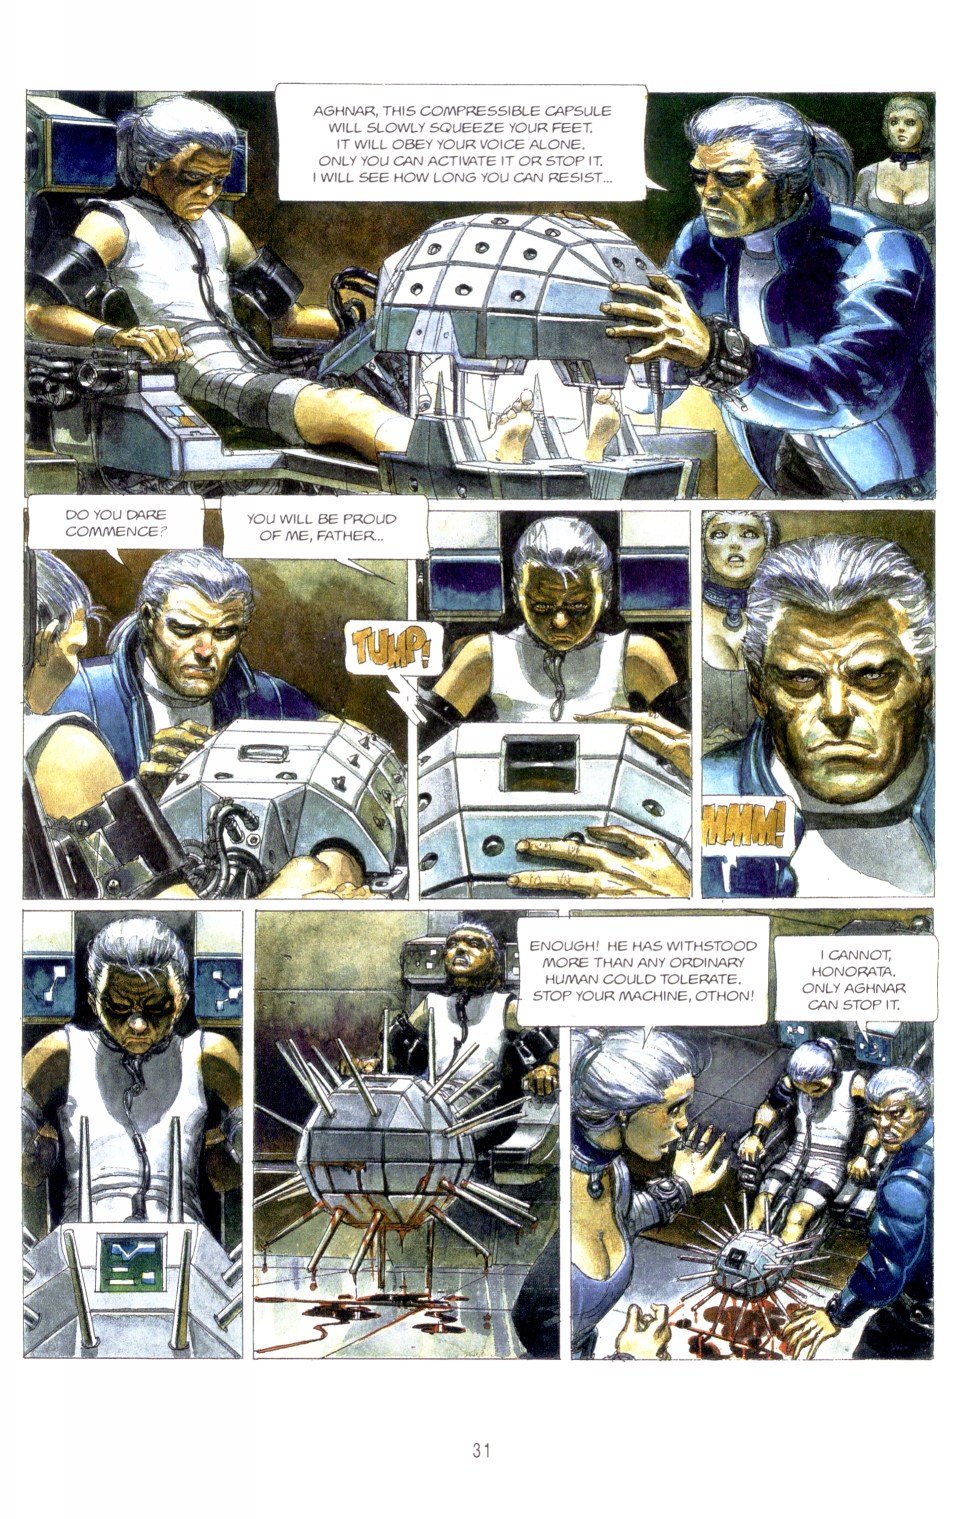 Read online The Metabarons comic -  Issue #4 - Honorata The Sorceres - 32